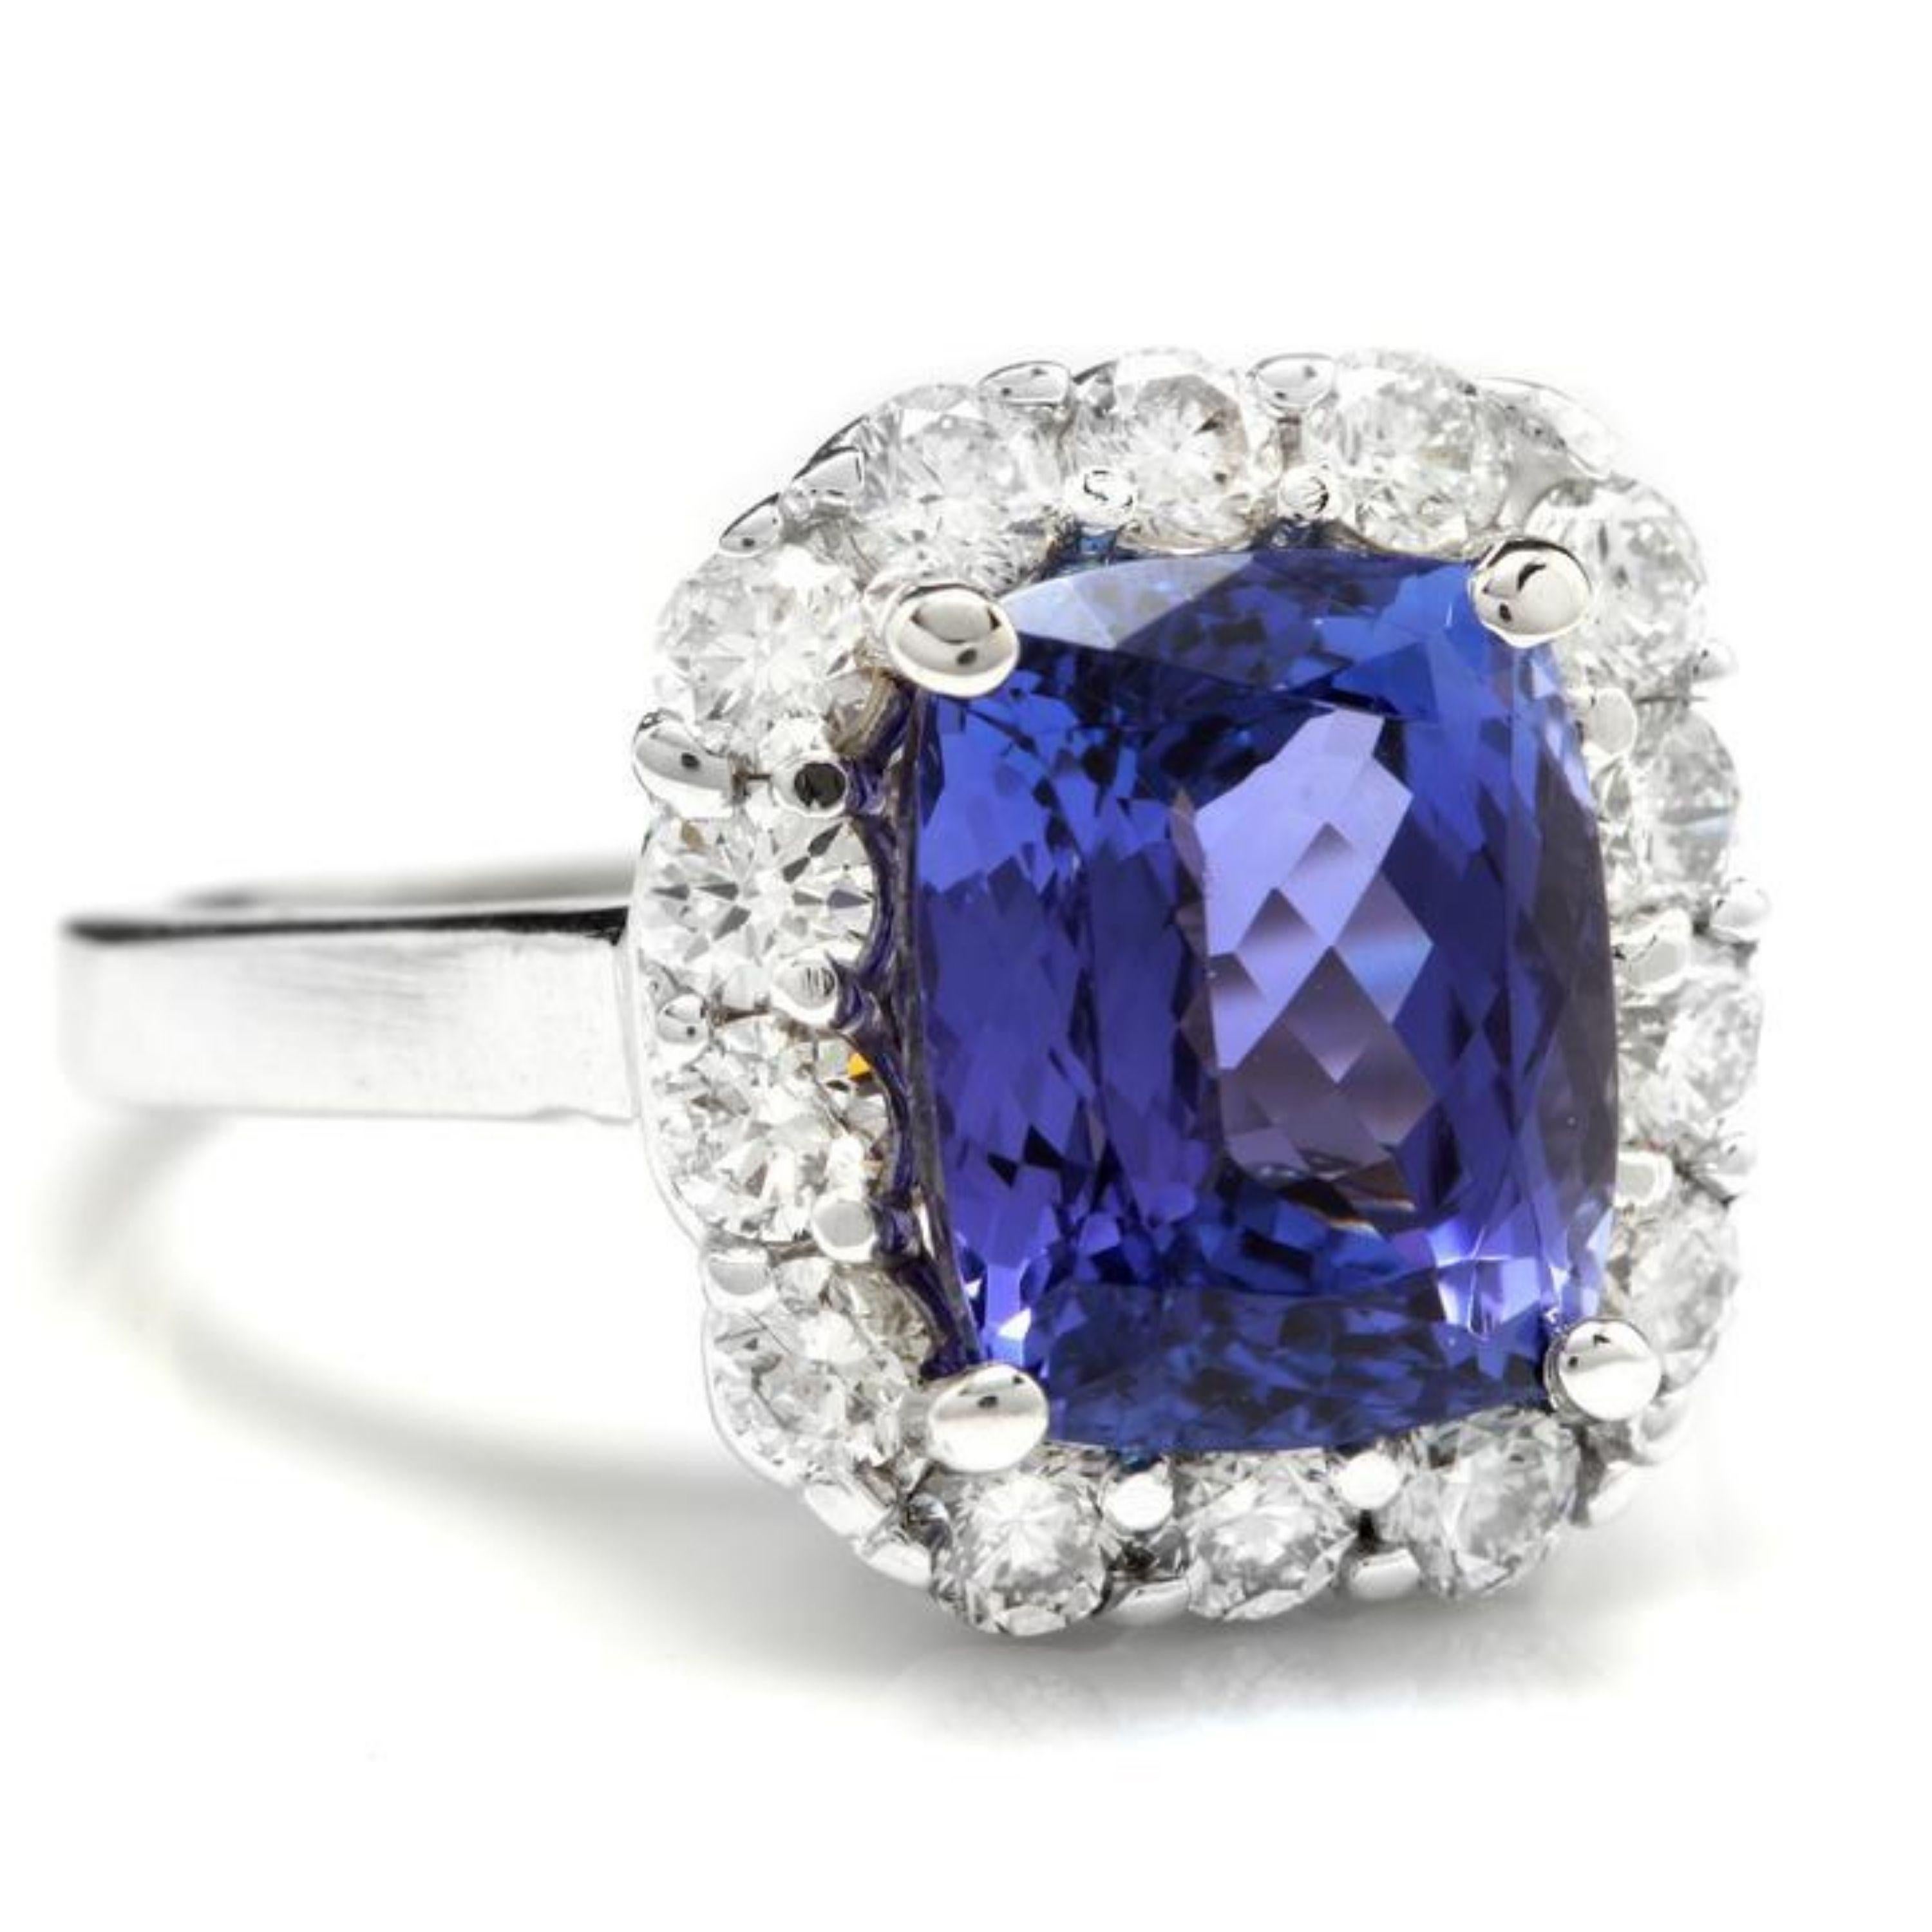 5.80 Carats Natural Very Nice Looking Tanzanite and Diamond 14K Solid White Gold Ring

Total Natural Cushion Cut Tanzanite Weight is: Approx. 4.65 Carats

Tanzanite Measures: Approx. 11 x 8.06mm

Tanzanite Treatment: Heat

Natural Round Diamonds